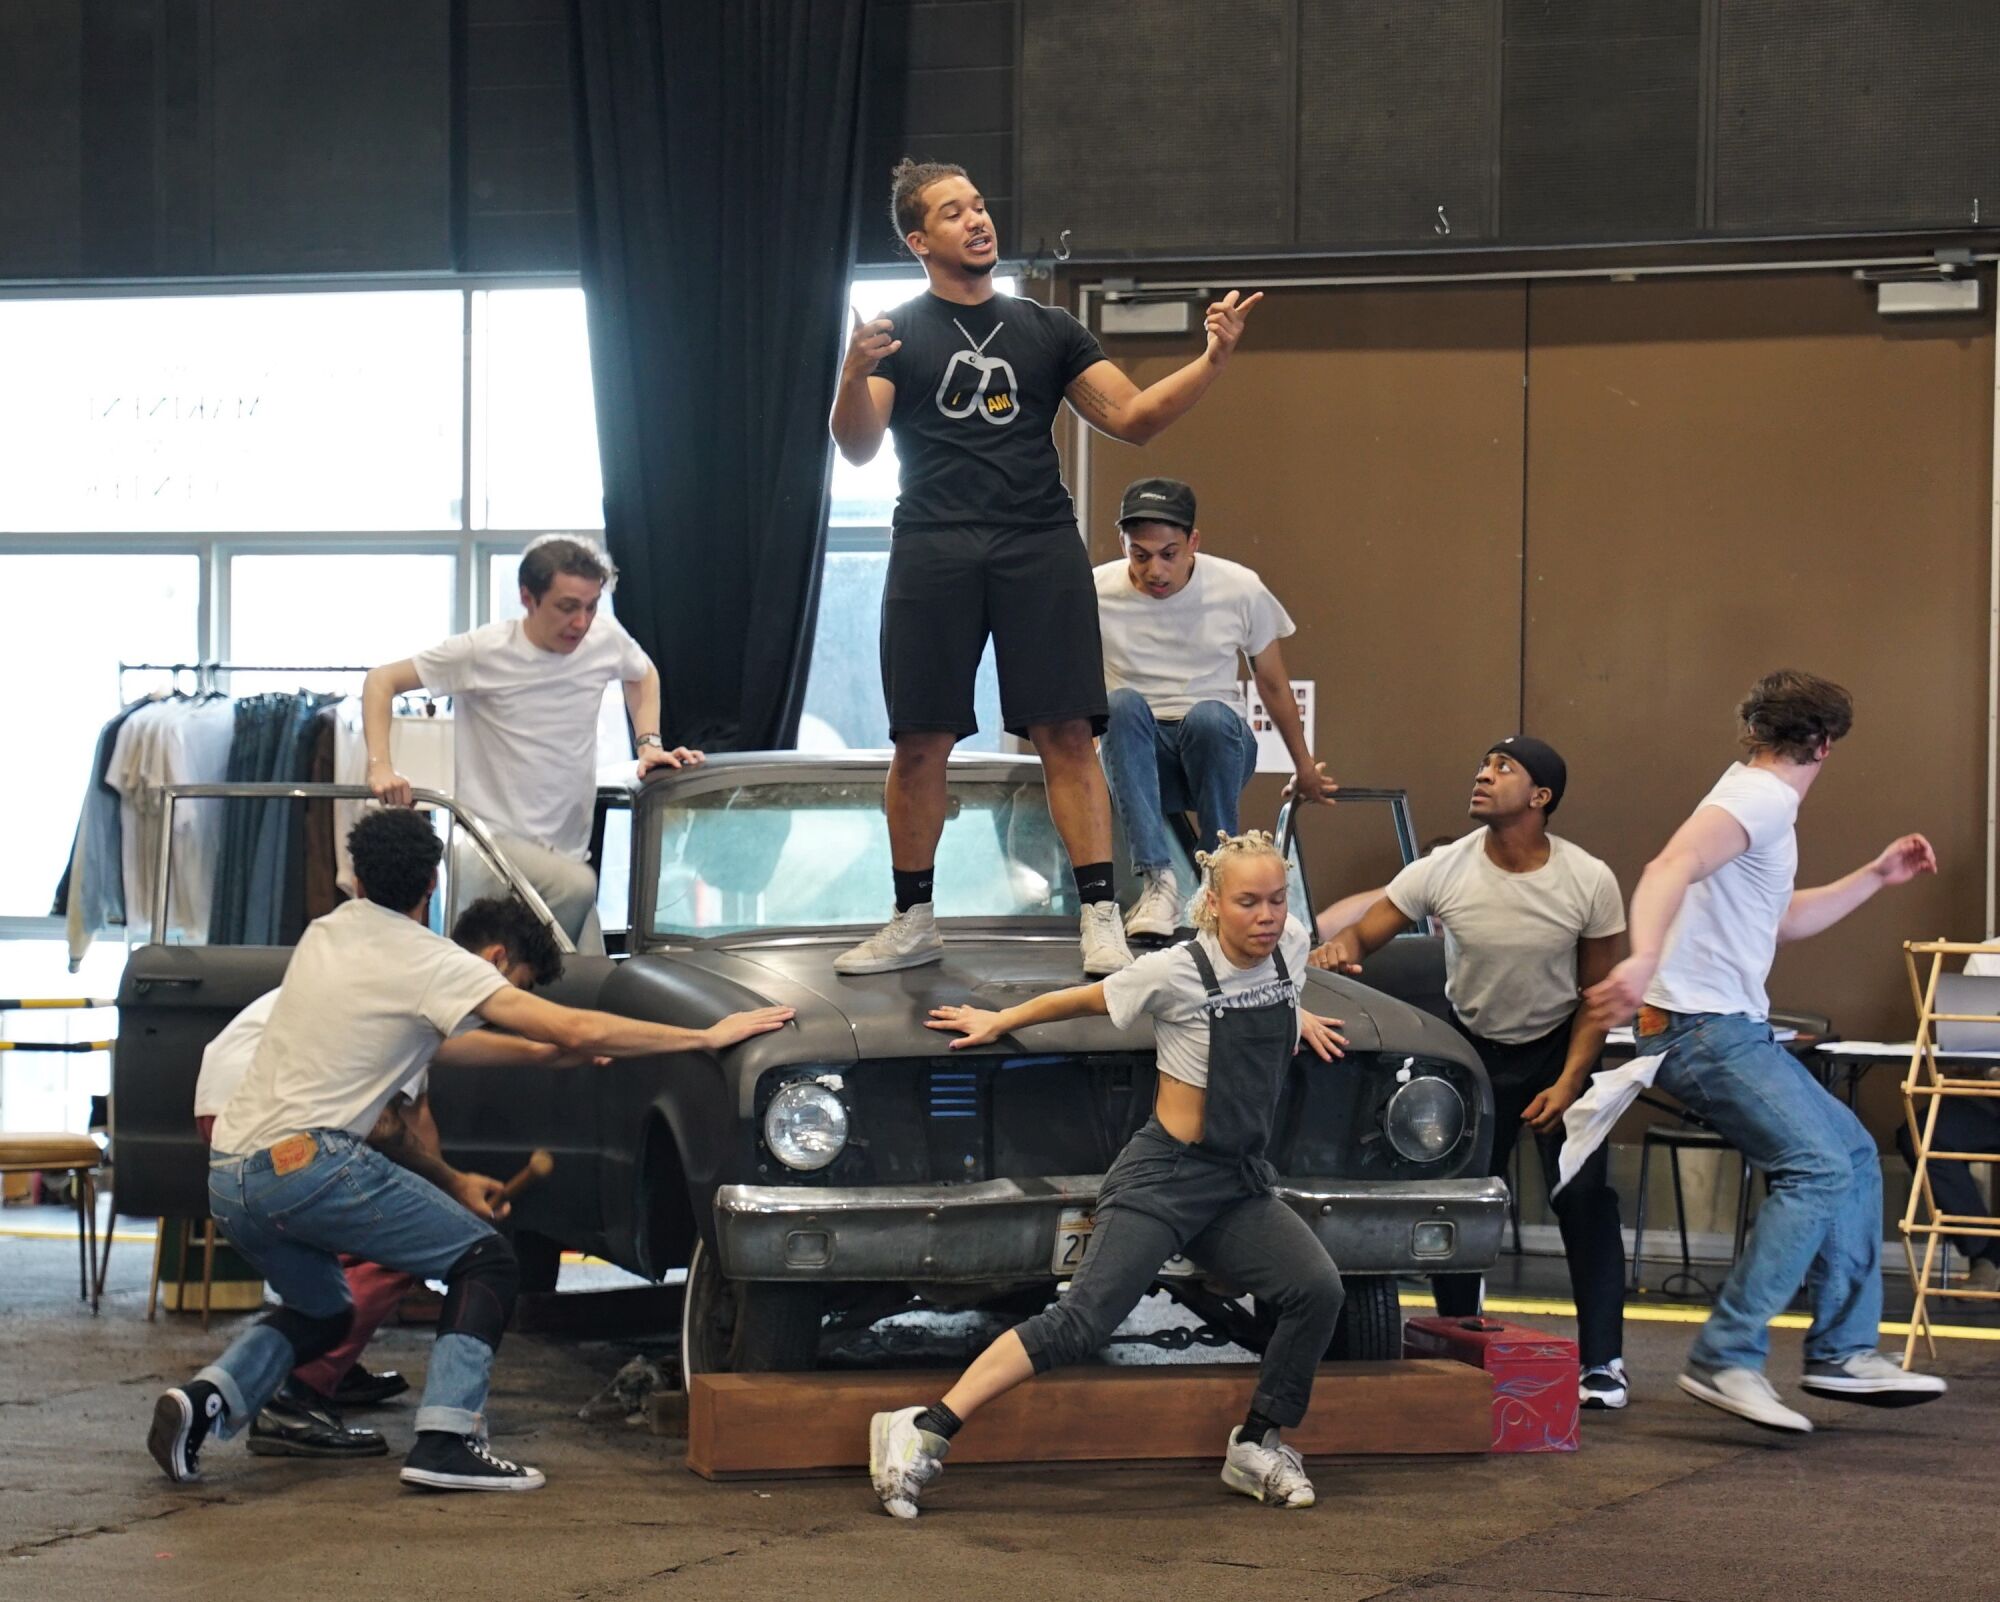 Greasers gang rehearse scene for "The Outsiders," a world premiere musical opening Feb. 19 at the La Jolla Playhouse.